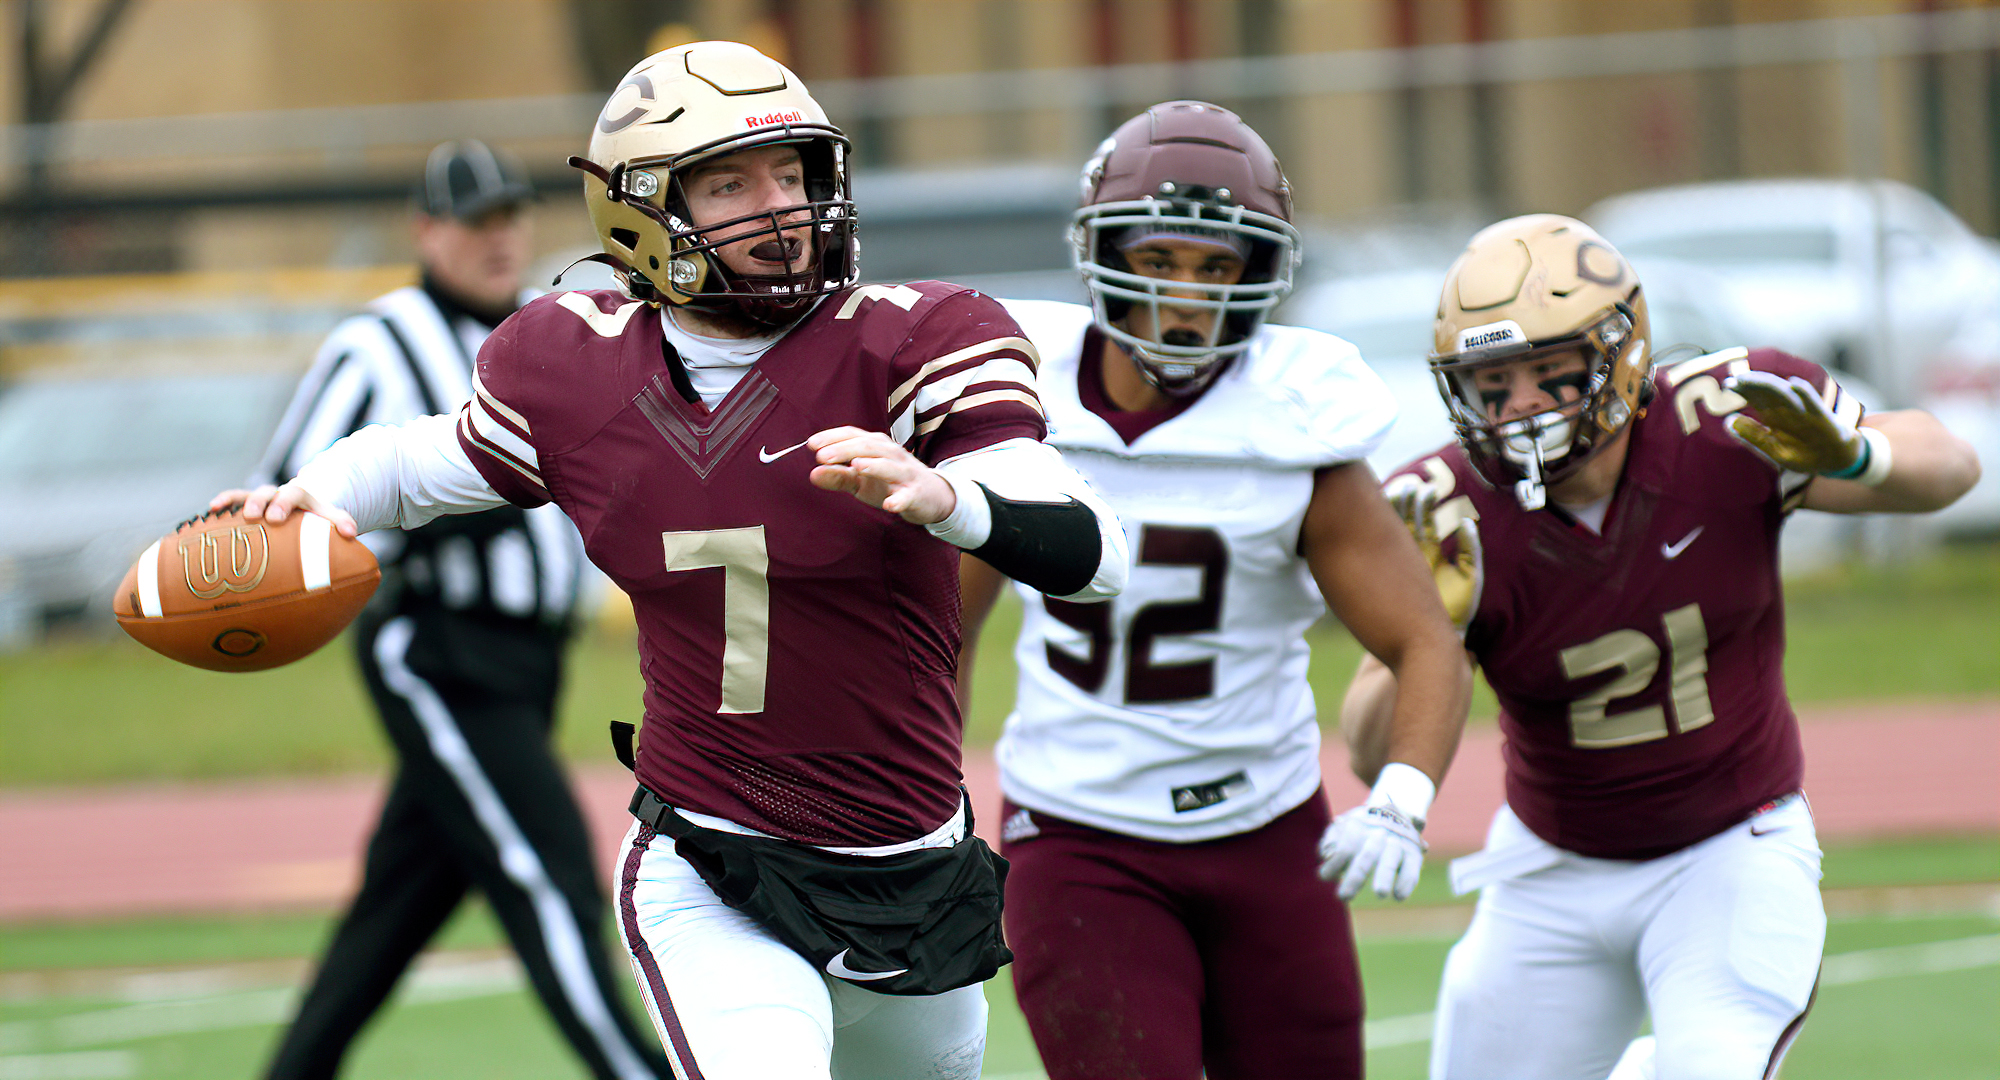 Senior quarterback Tanner Dubois threw for four touchdowns and went 16-for-24 for 191 yards in the Cobbers' win at Hamline.